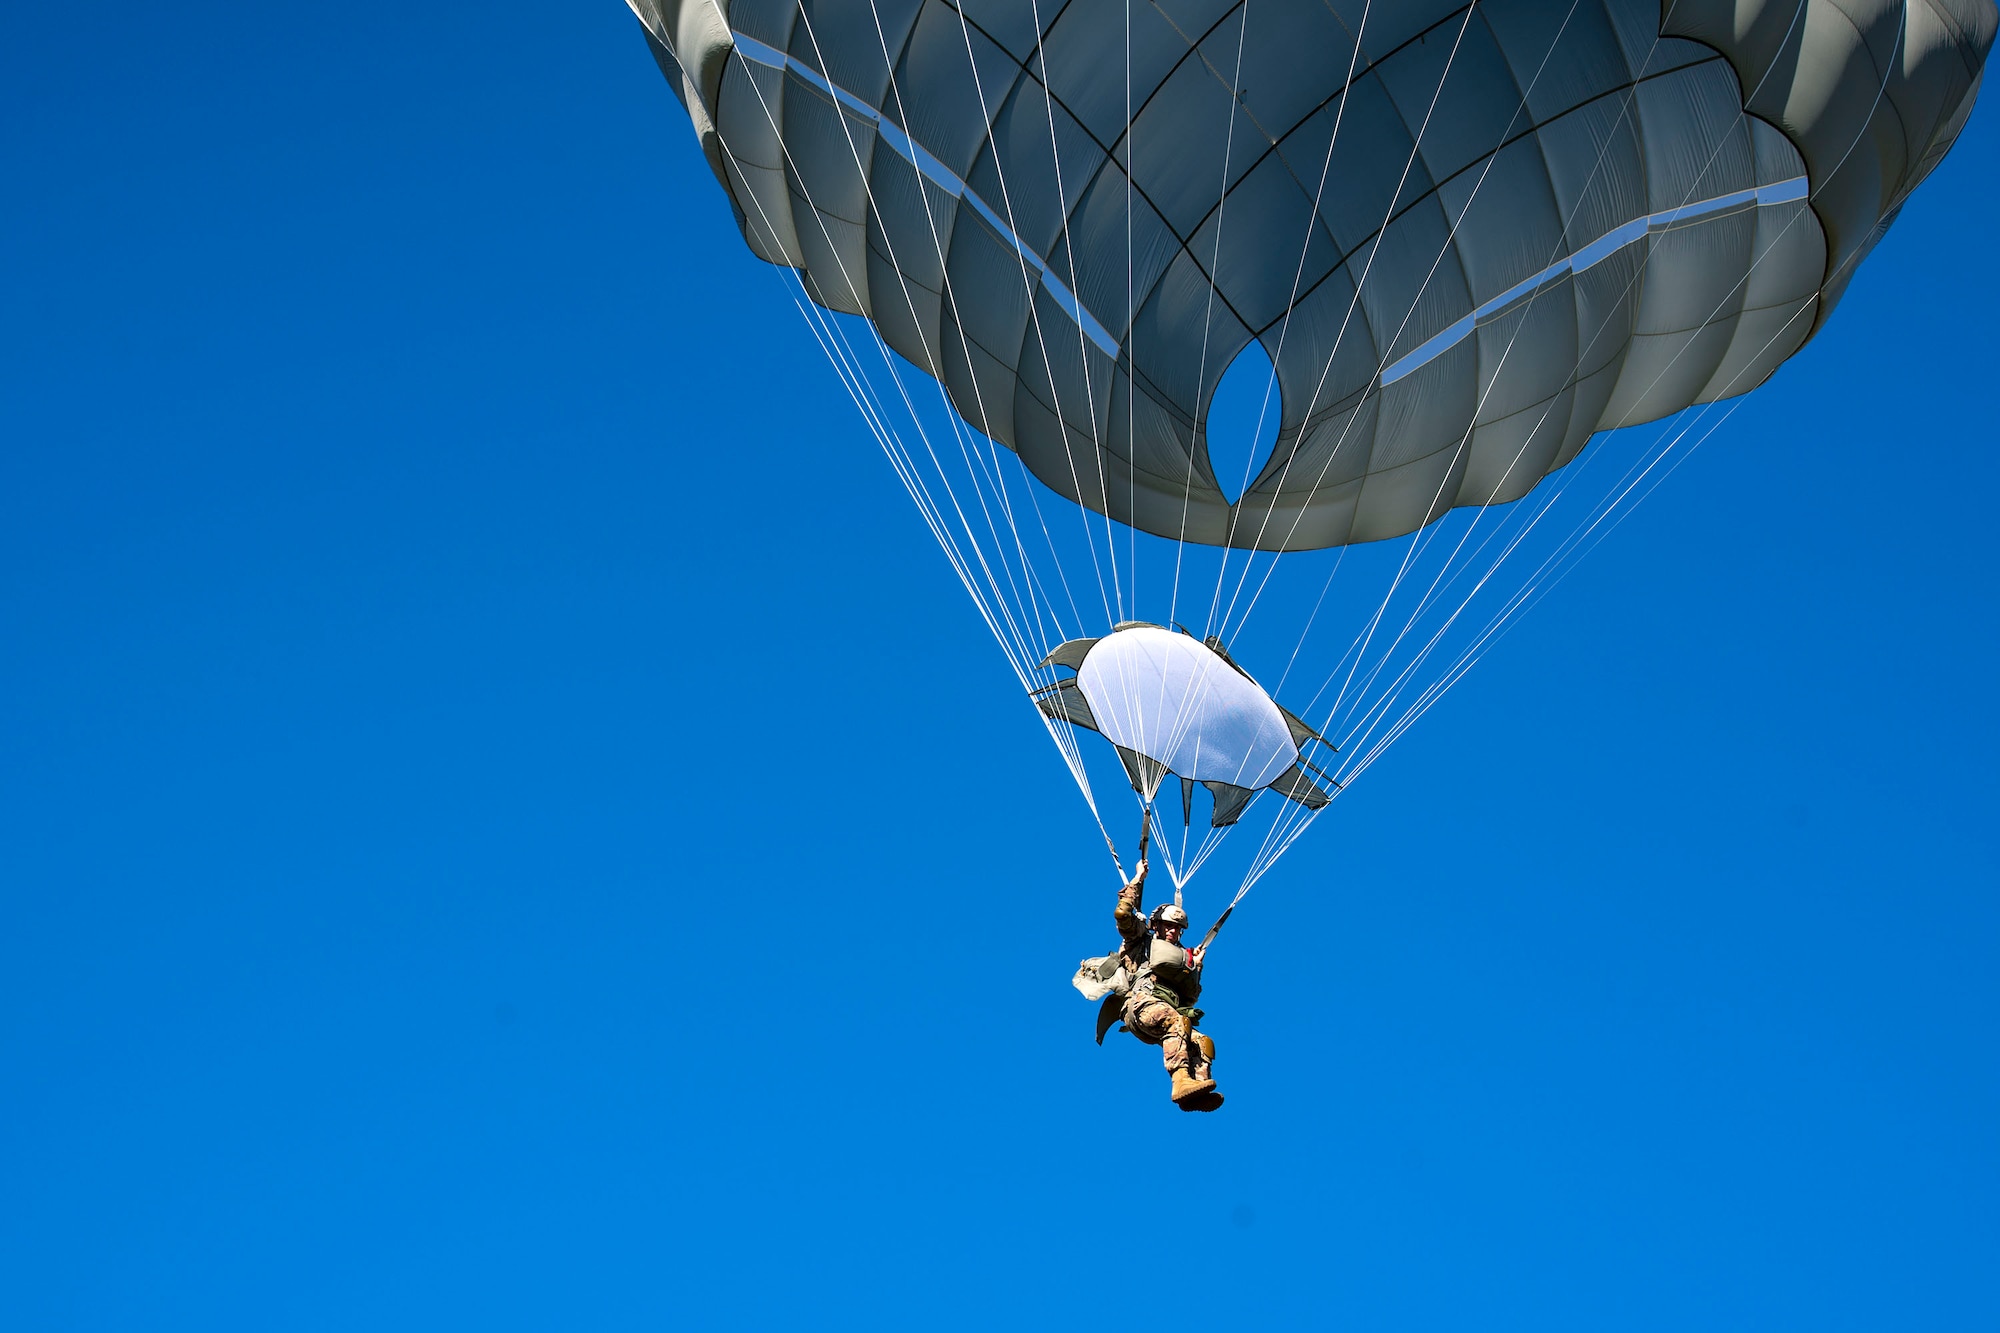 An Airman from the 93d Air Ground Operations Wing parachutes down during static-line jump training, Nov. 21, 2018, at Moody Air Force Base, Ga. The overall objective of the training was to increase jumpers’ skills, knowledge and proficiency in regards to airborne operations. During a static-line jump, the jumper is attached to the aircraft via the ‘static-line’, which automatically deploys the jumpers’ parachute after they’ve exited the aircraft. (U.S. Air Force photo by Airman 1st Class Erick Requadt)